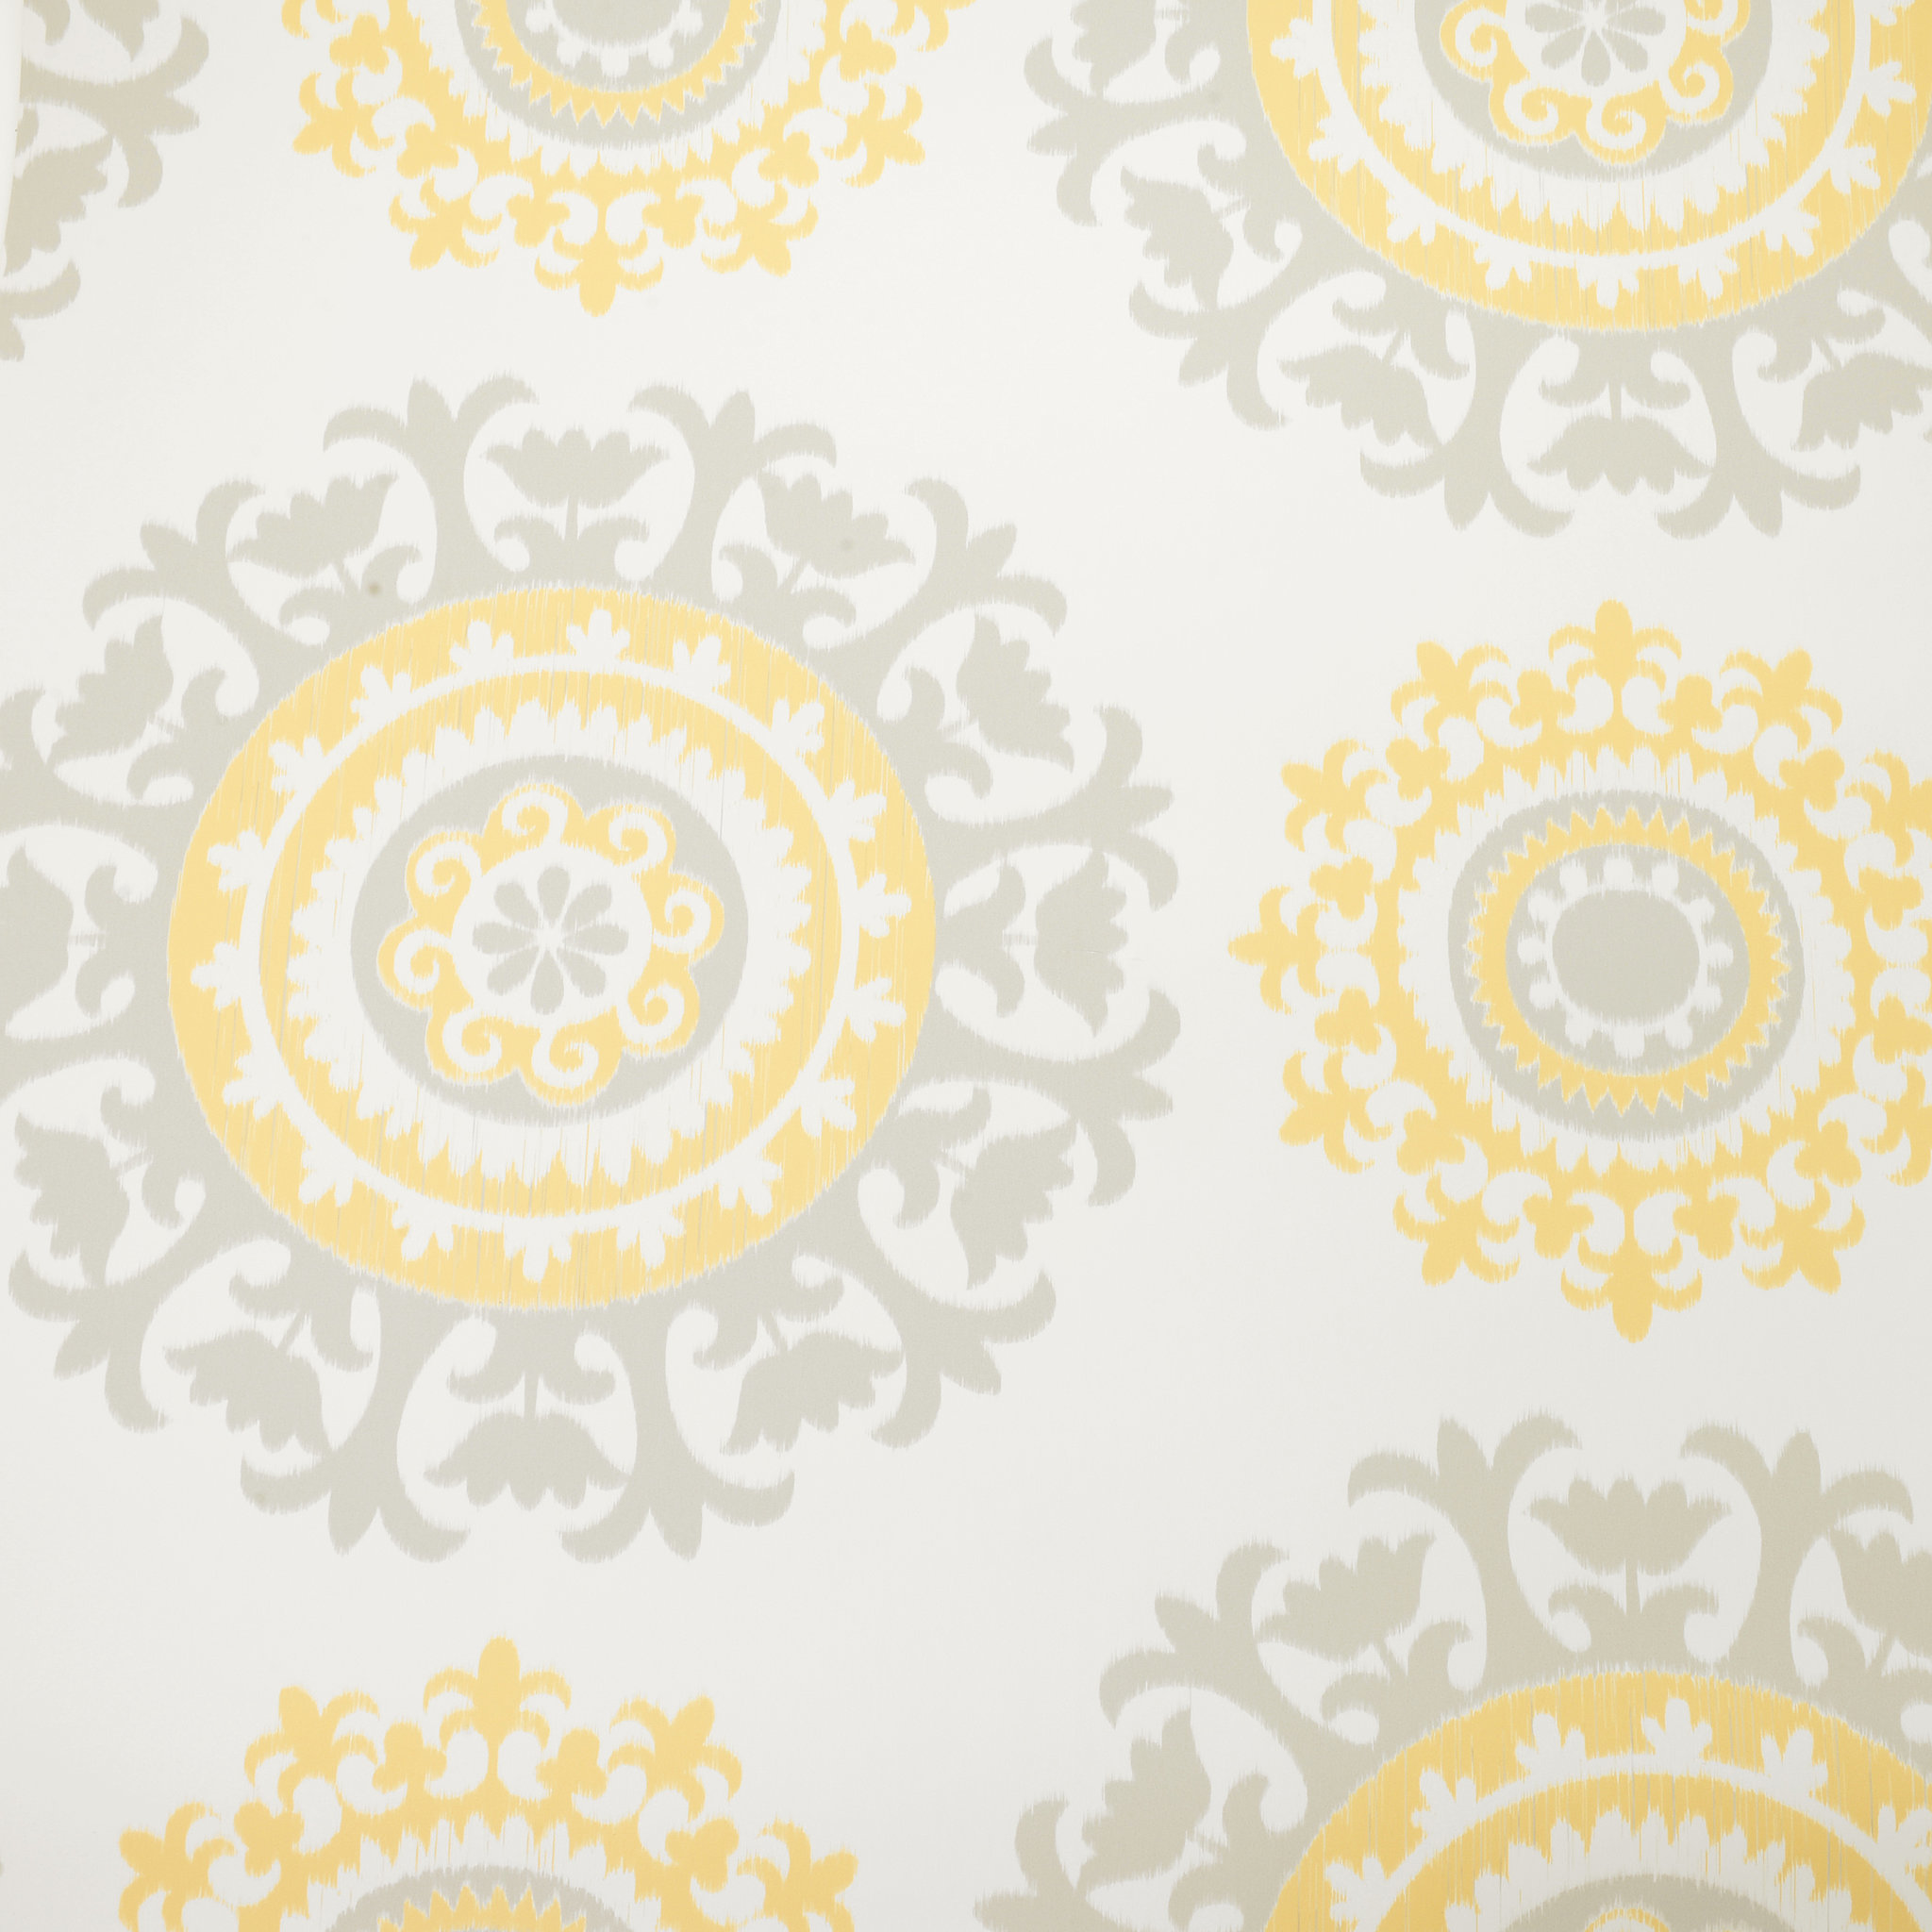 The Nicole Curtis Home Removable Wallpaper Collection Includes A